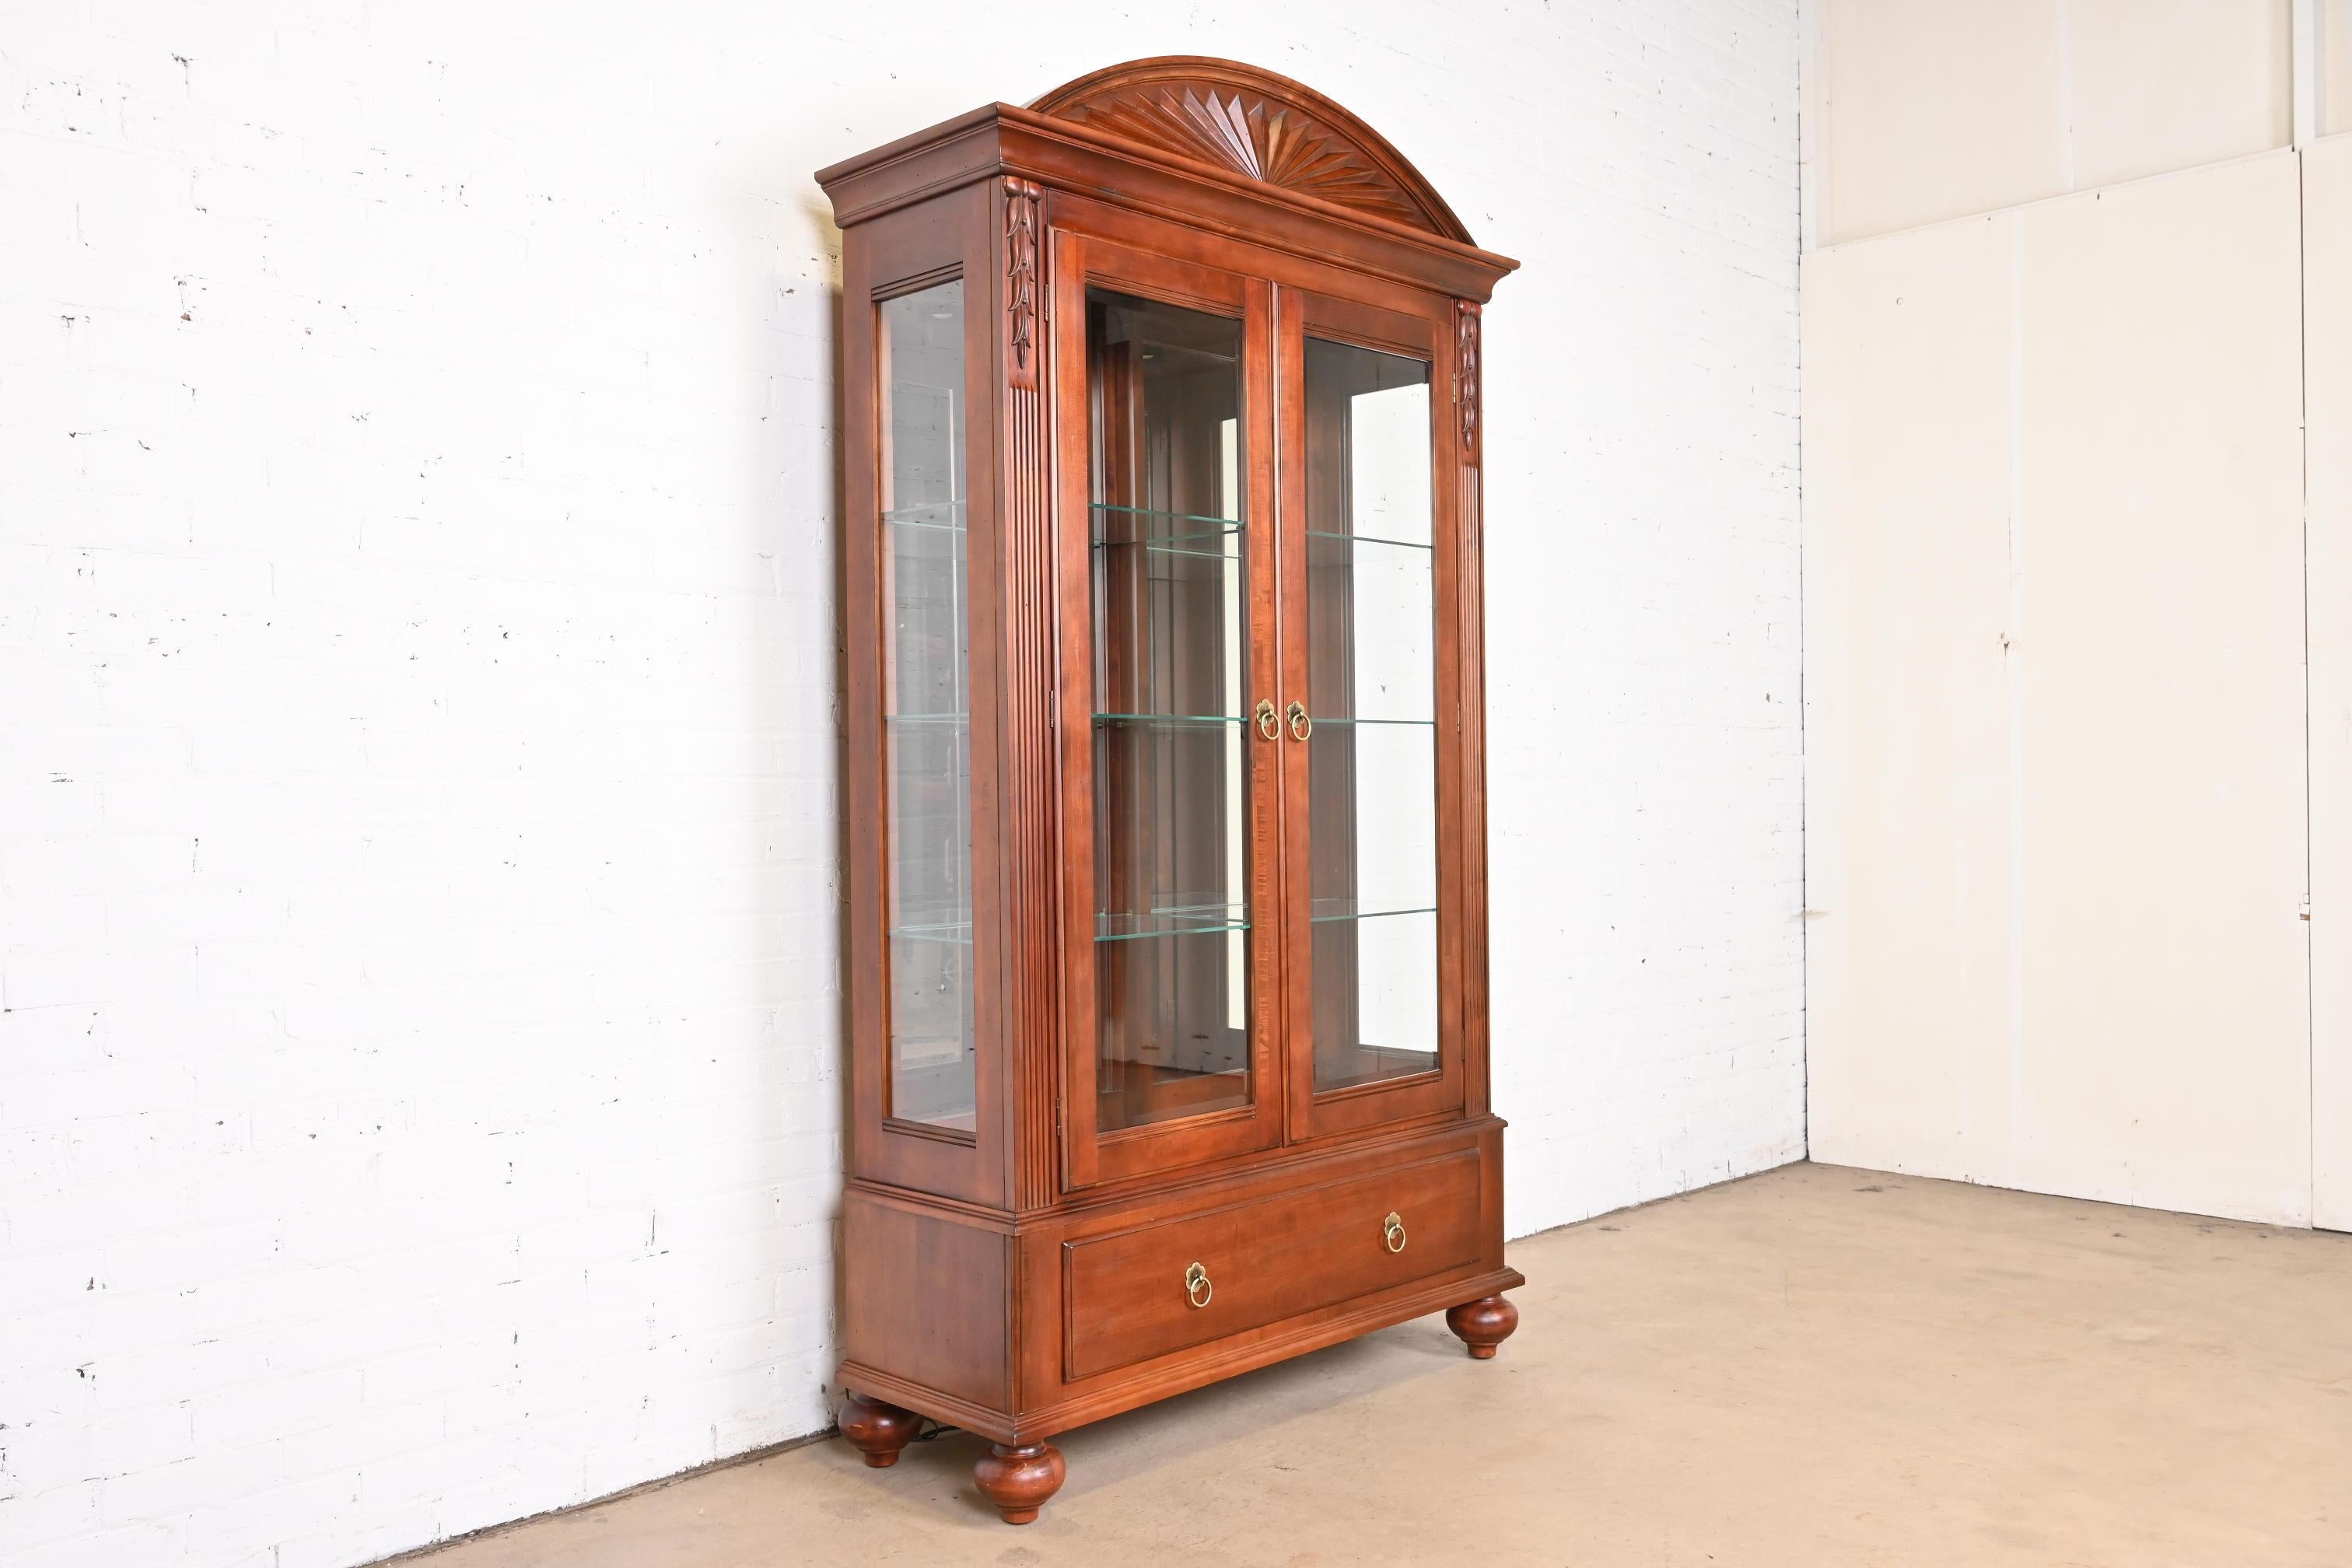 20th Century Ethan Allen British Colonial Cherry Wood Lighted Bookcase or Display Cabinet